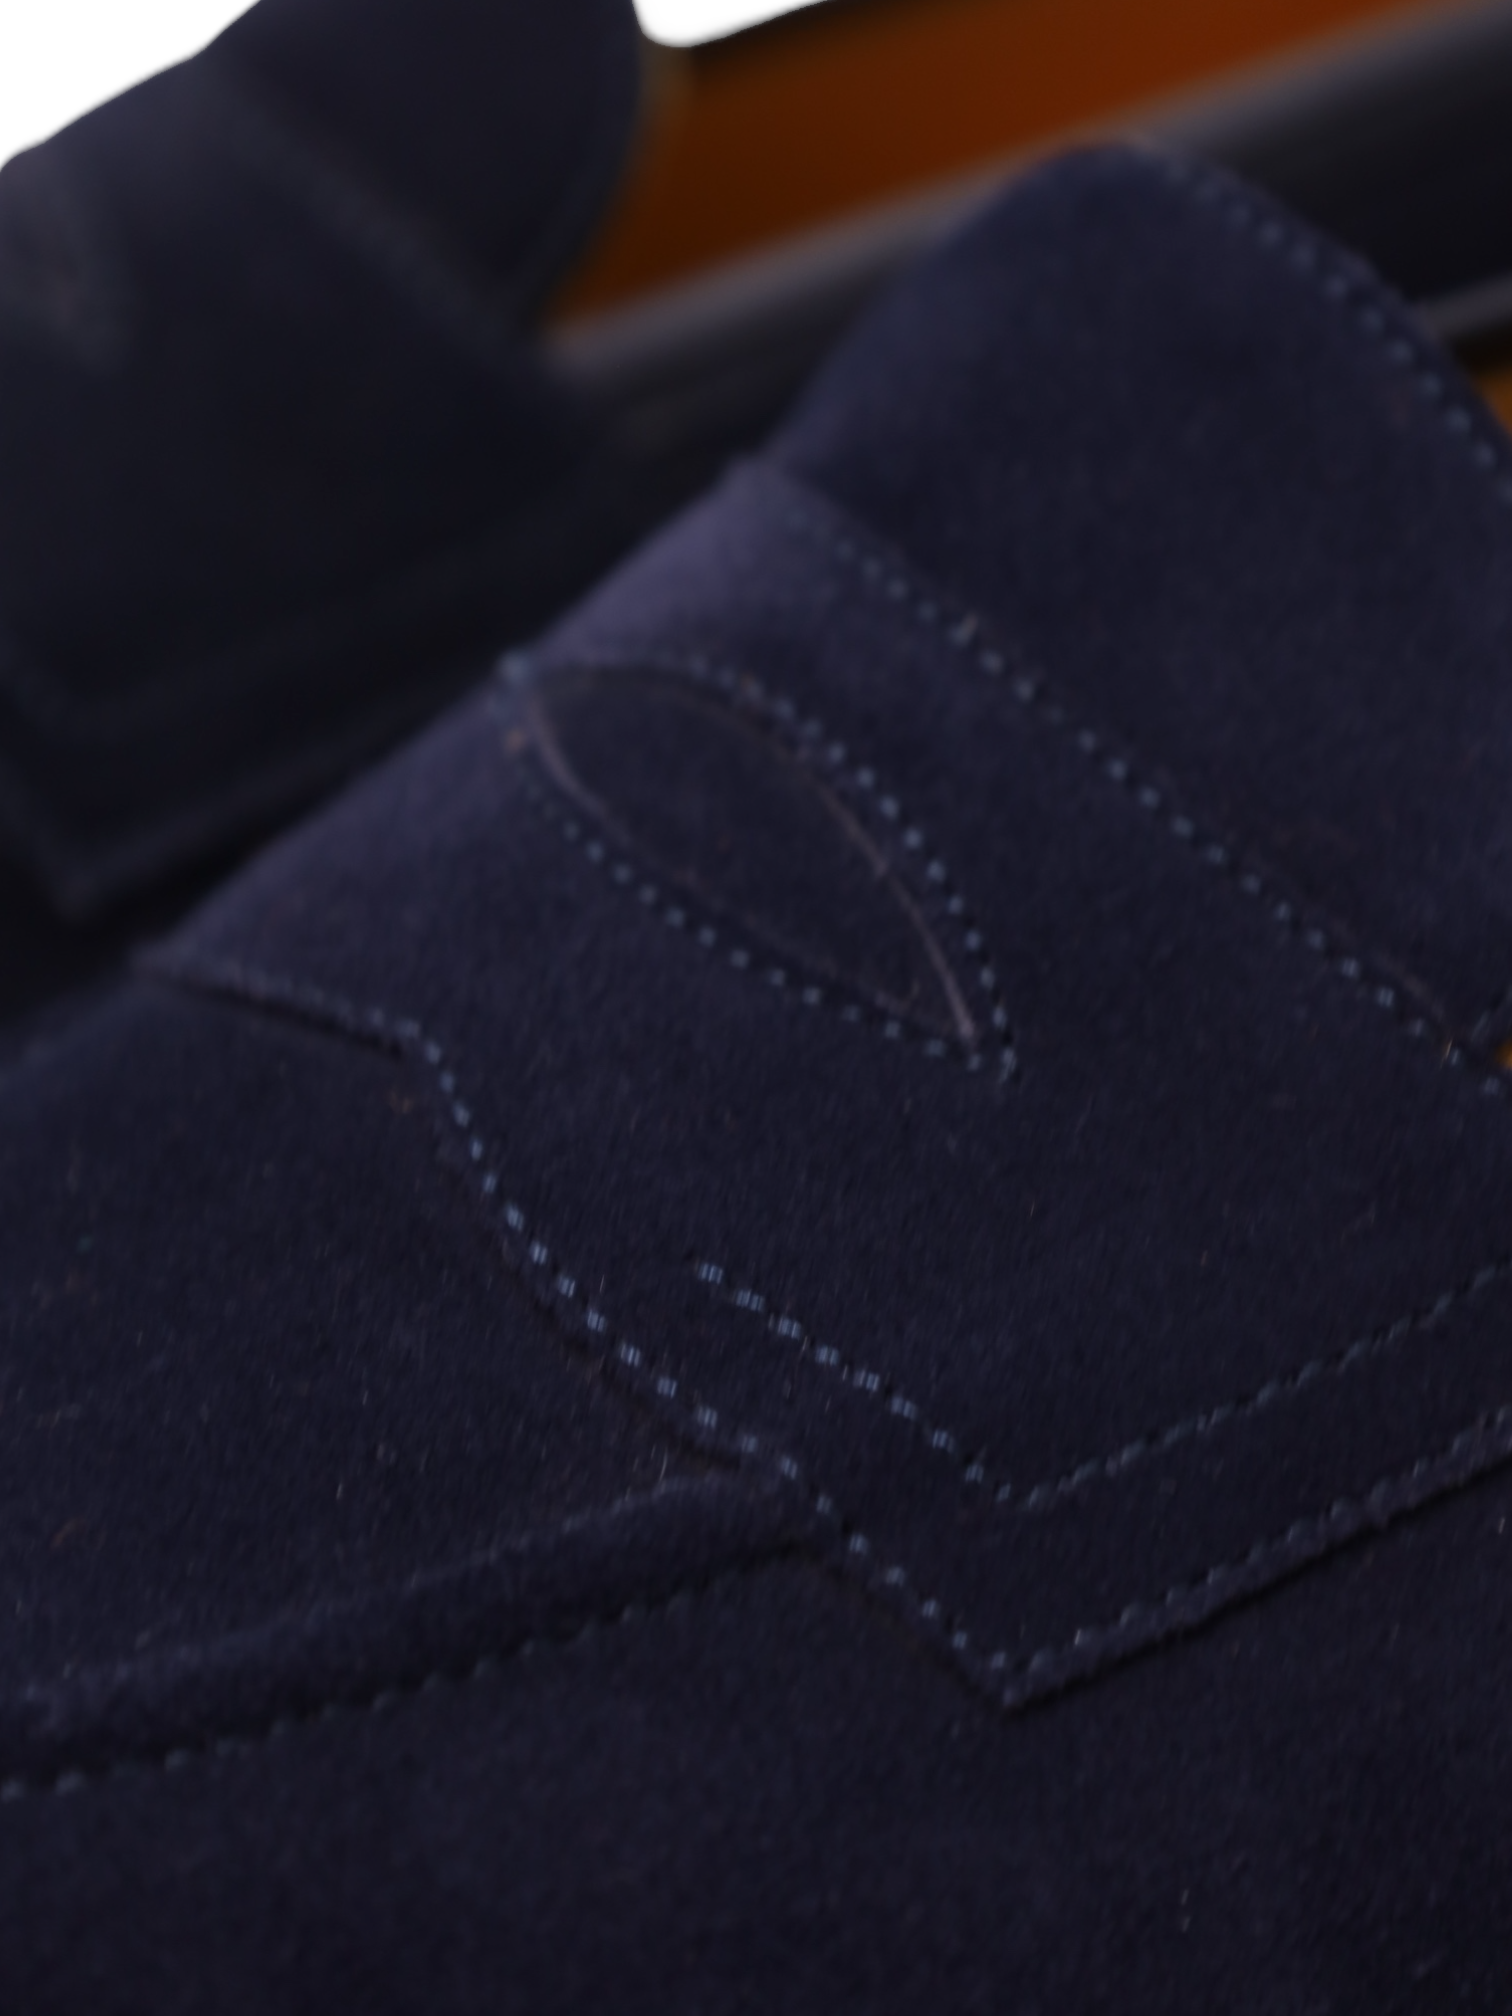 Edward Green Navy Suede Piccadilly Penny Loafer